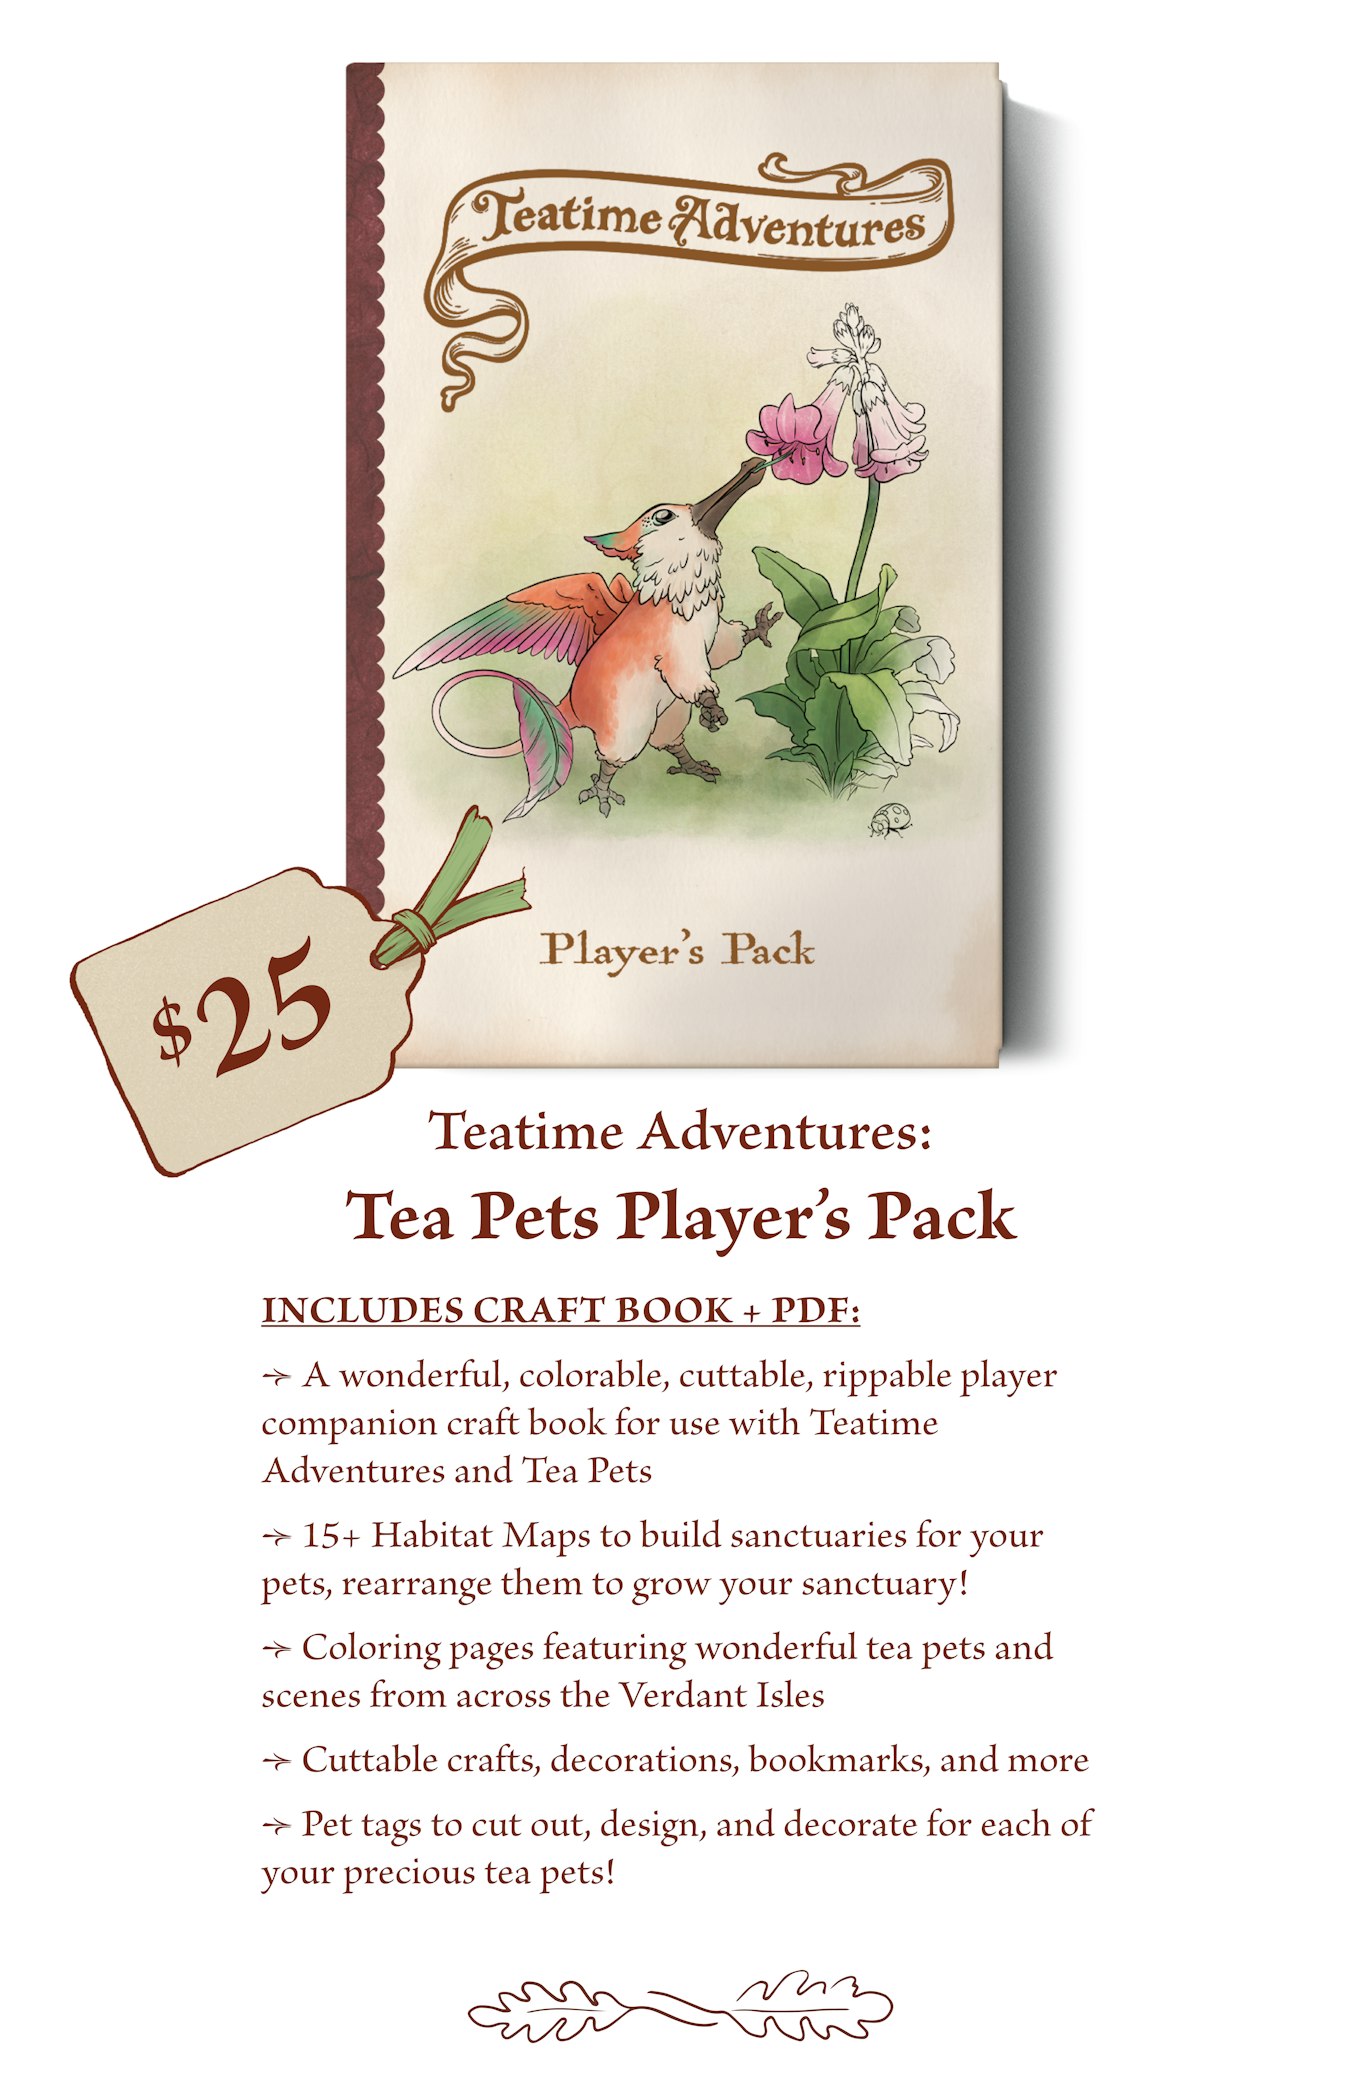 $25 - The Player’s Pack craft book includes: A wonderful, colorable, cuttable, rippable player companion craft book for use with Teatime Adventures and Tea Pets. 15+ Habitat Maps to build sanctuaries for your pets, rearrange them to grow your sanctuary! Coloring pages featuring wonderful tea pets and scenes from across the Verdant Isles. Cuttable crafts, decorations, bookmarks, and more Pet tags to cut out, design, and decorate for each of your precious tea pets! 